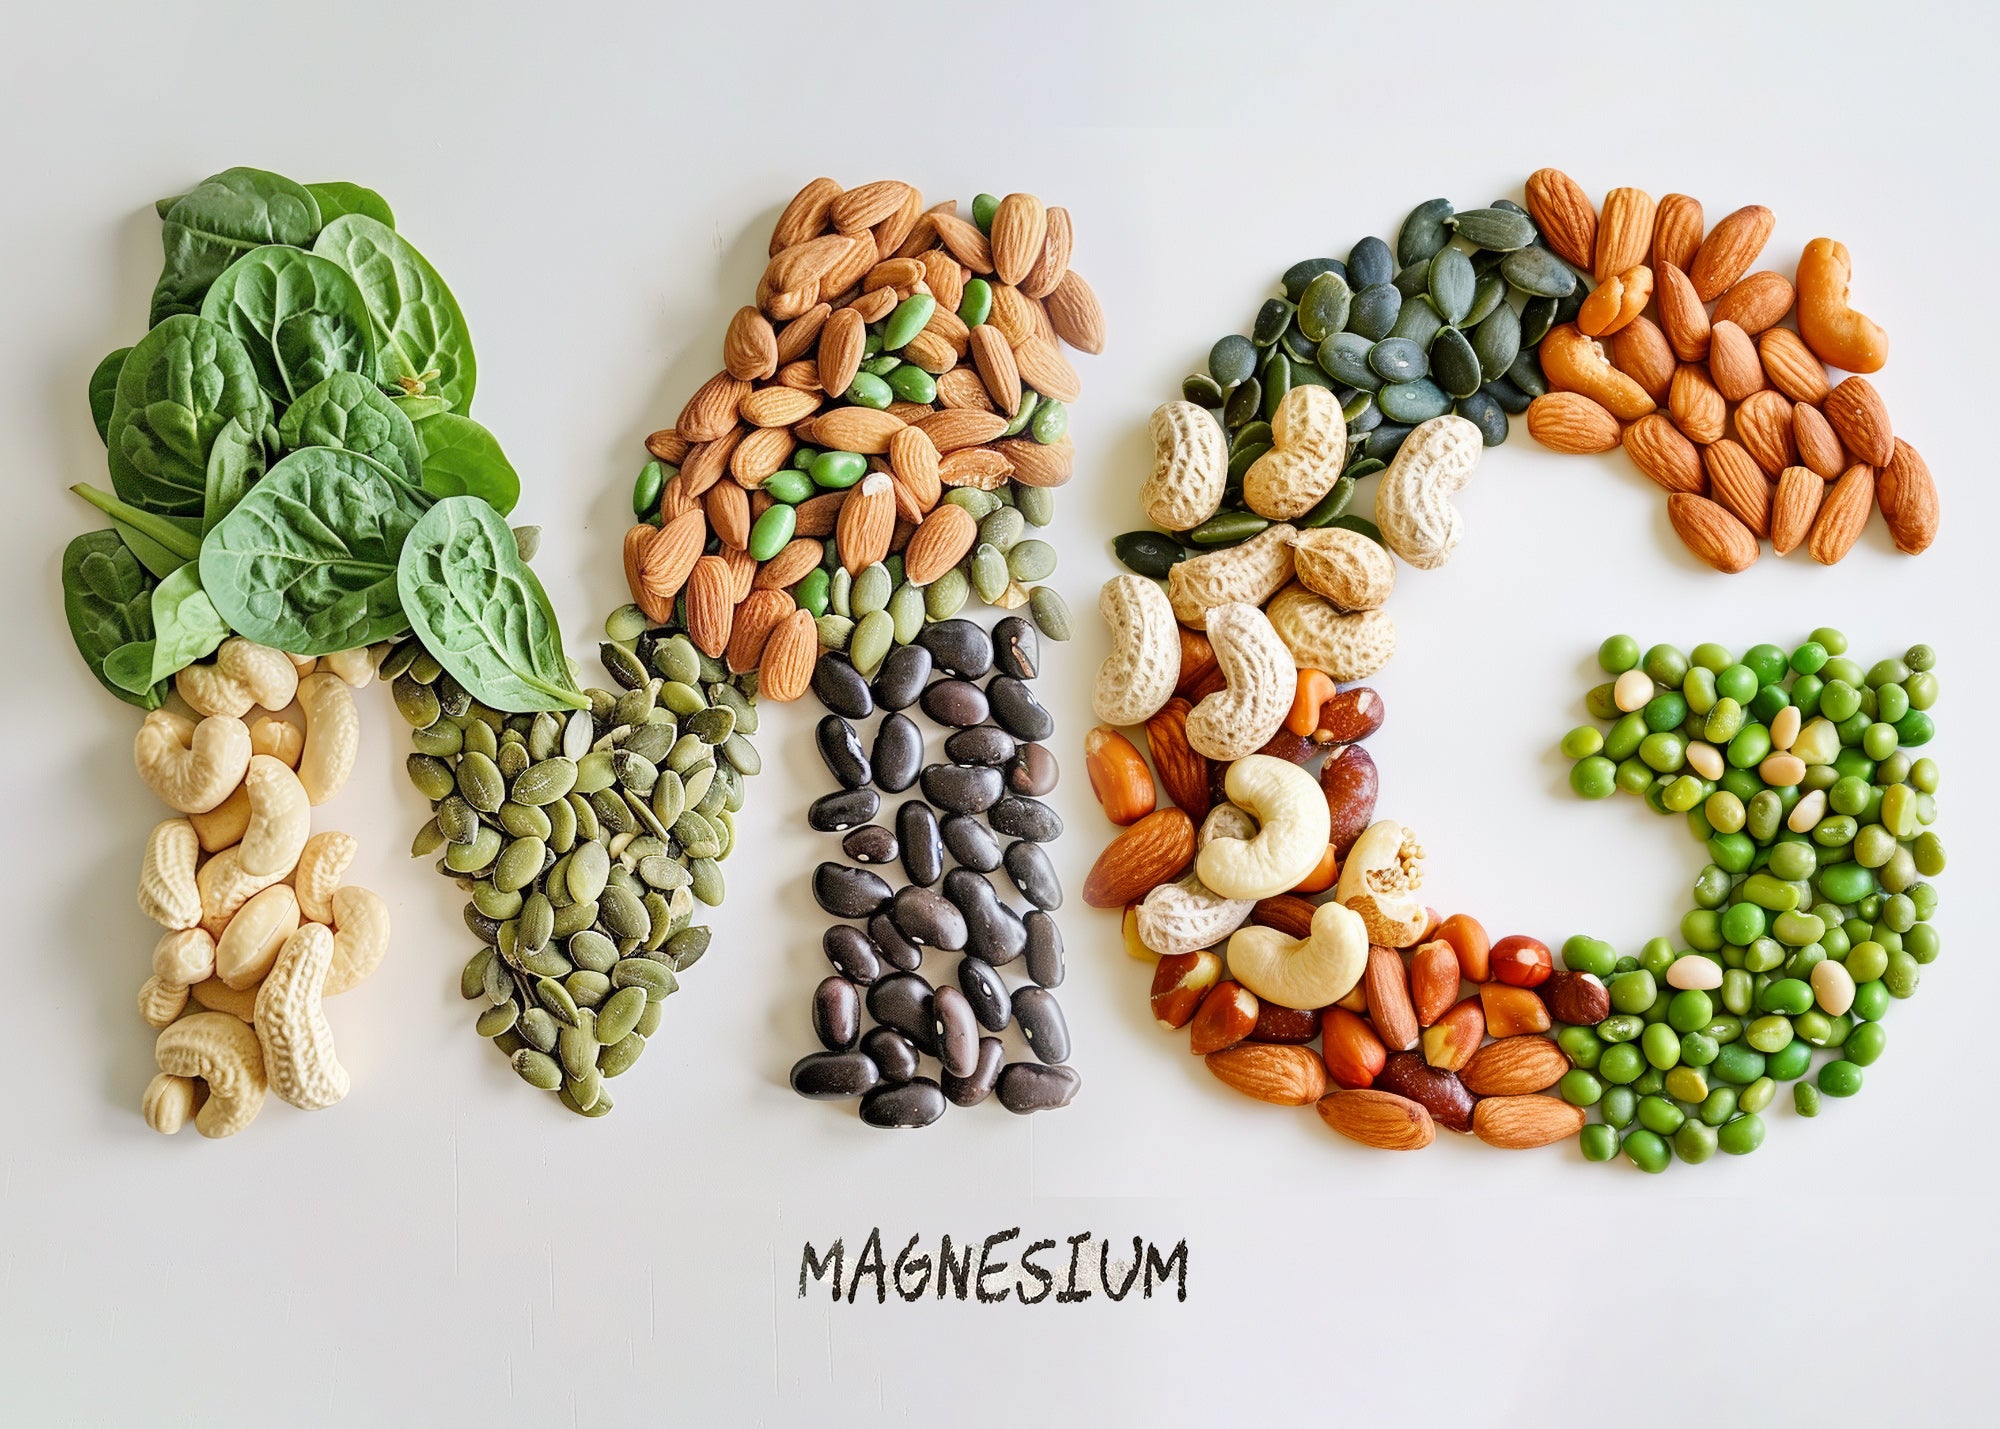 The Top 10 Food Sources Of Magnesium